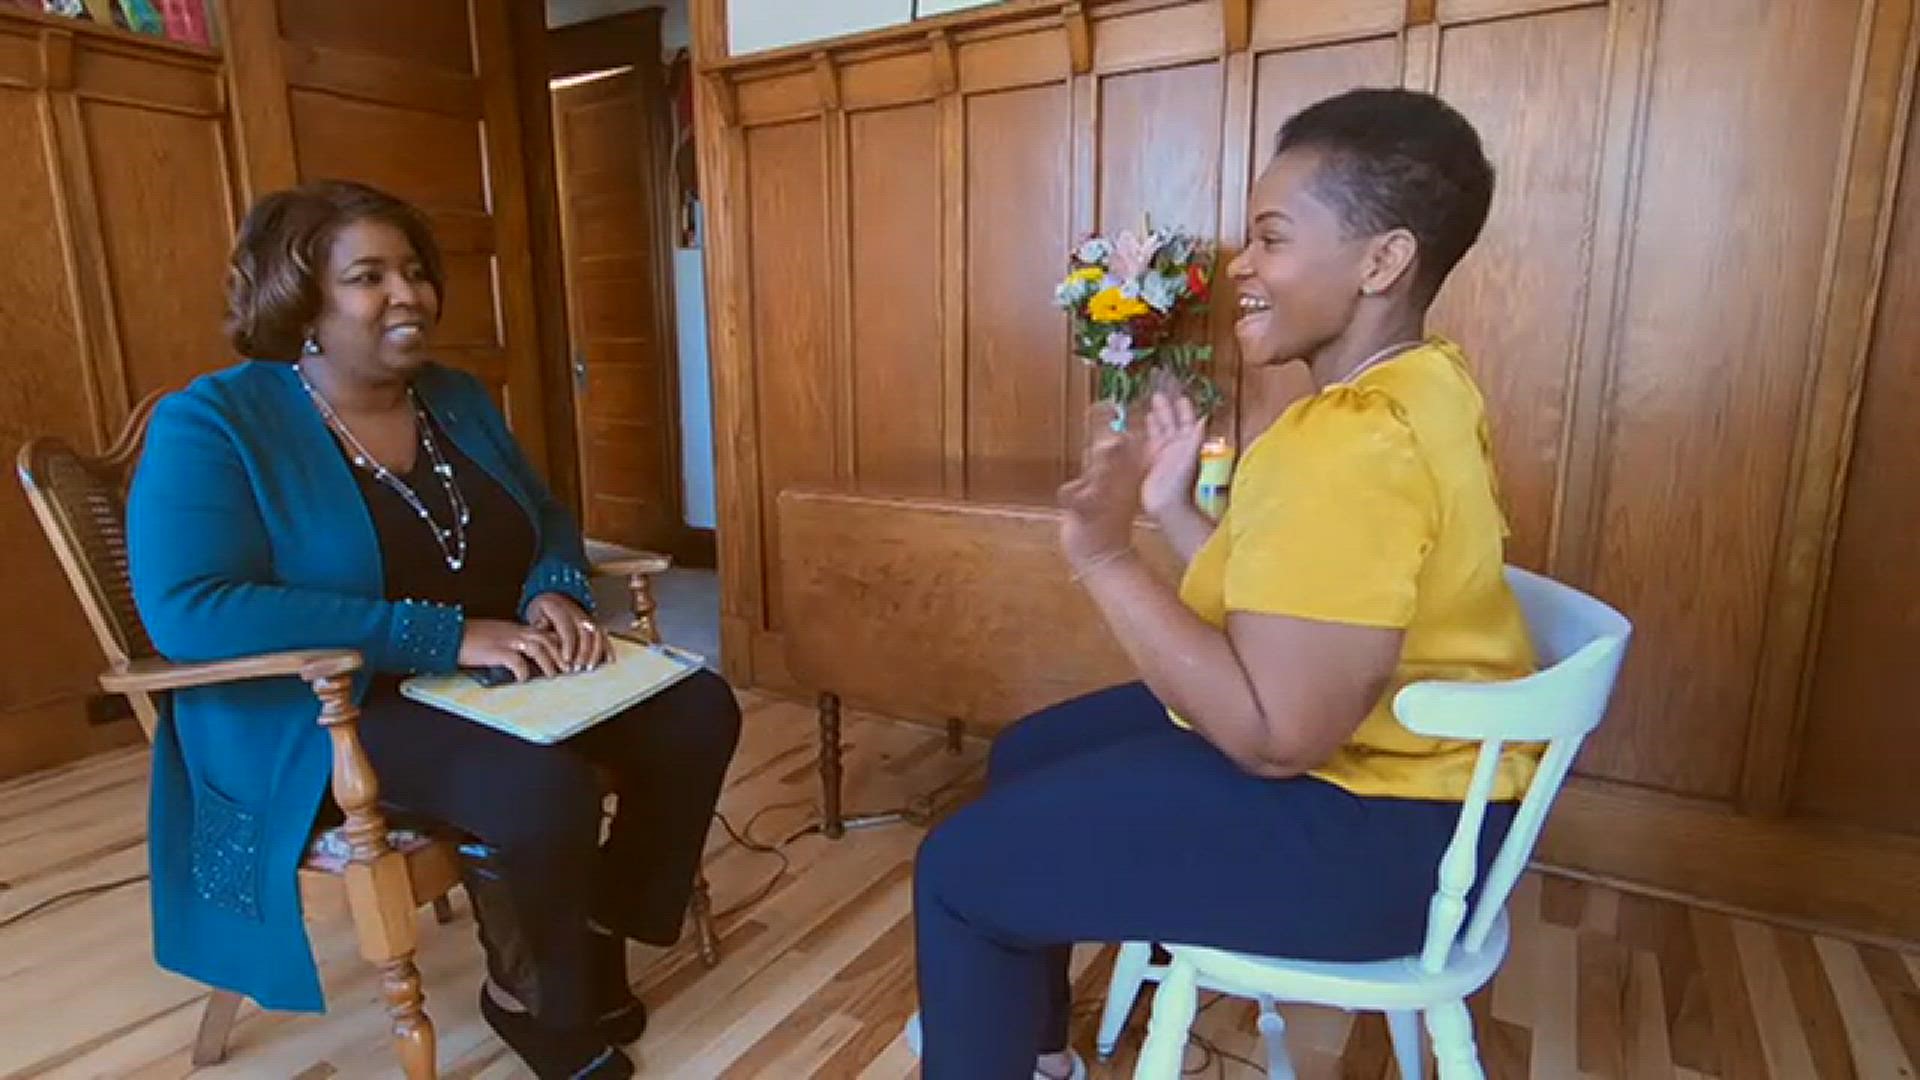 2 On Your Side exclusive: India Walton sat down with WGRZ's Claudine Ewing in announcing her run for the Masten District seat on Buffalo Common Council.